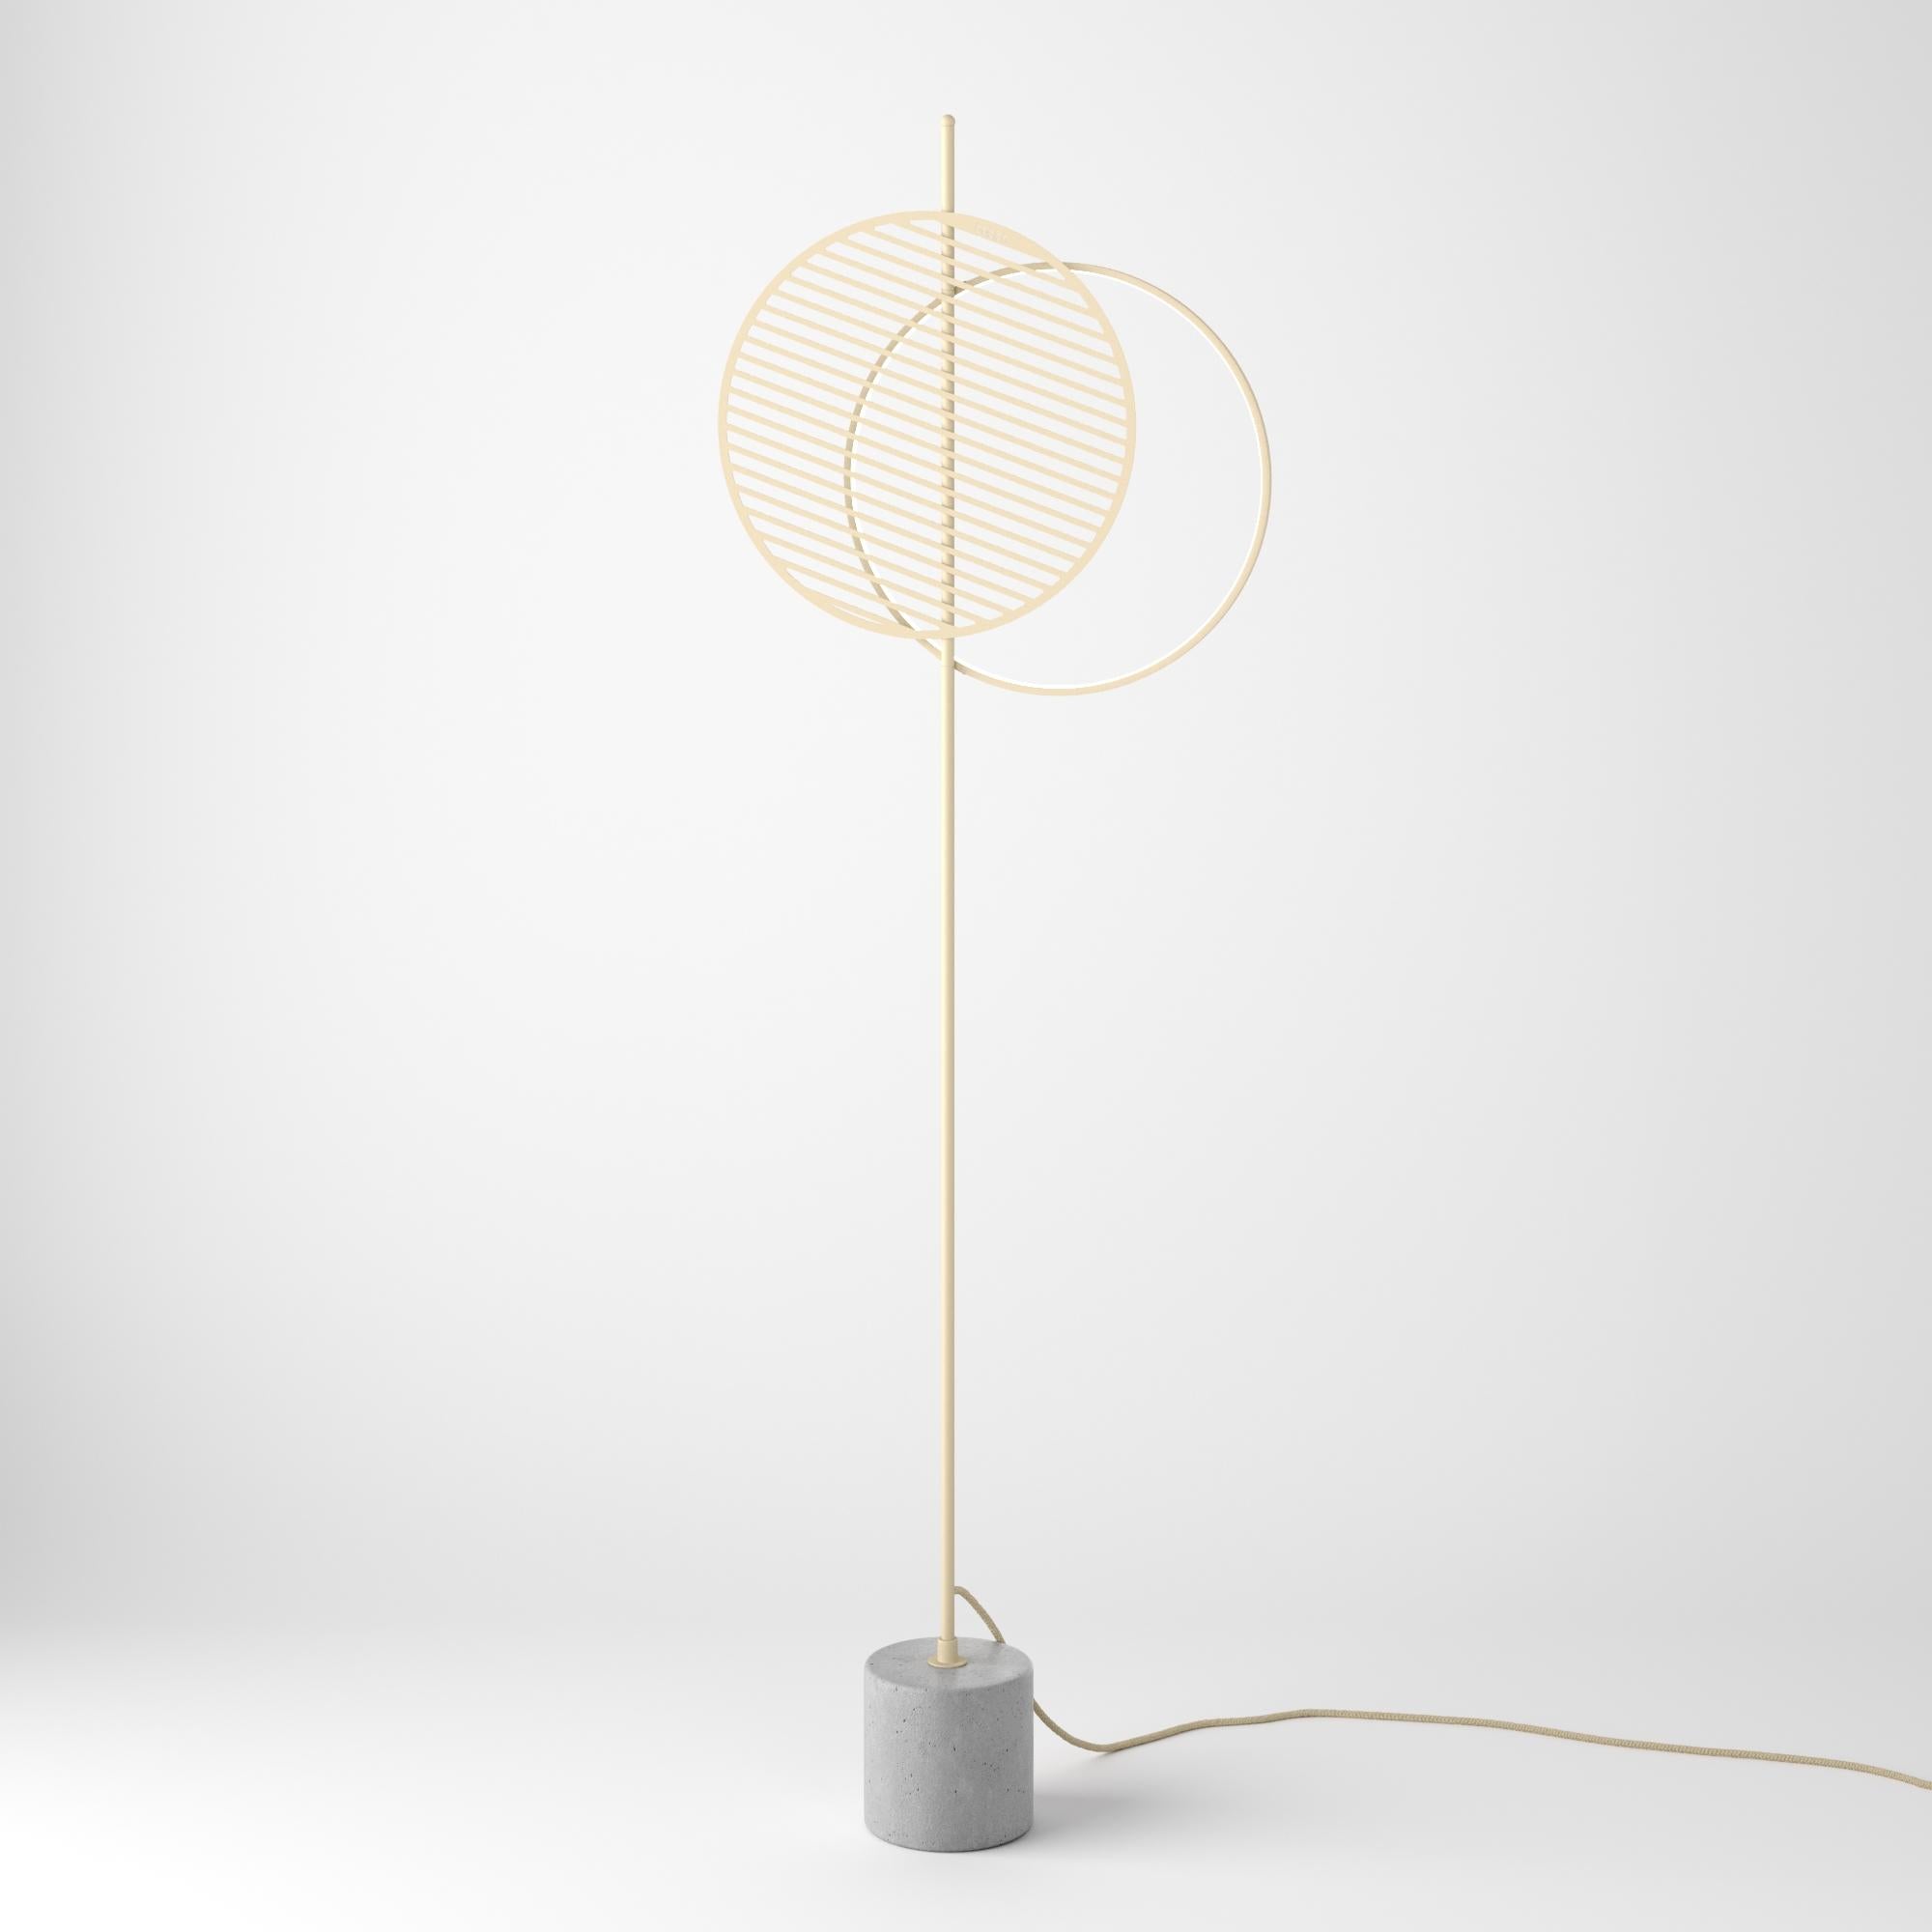 Hand-Crafted Stylish Scandinavian Modern Contemporary Floor Lamp For Sale